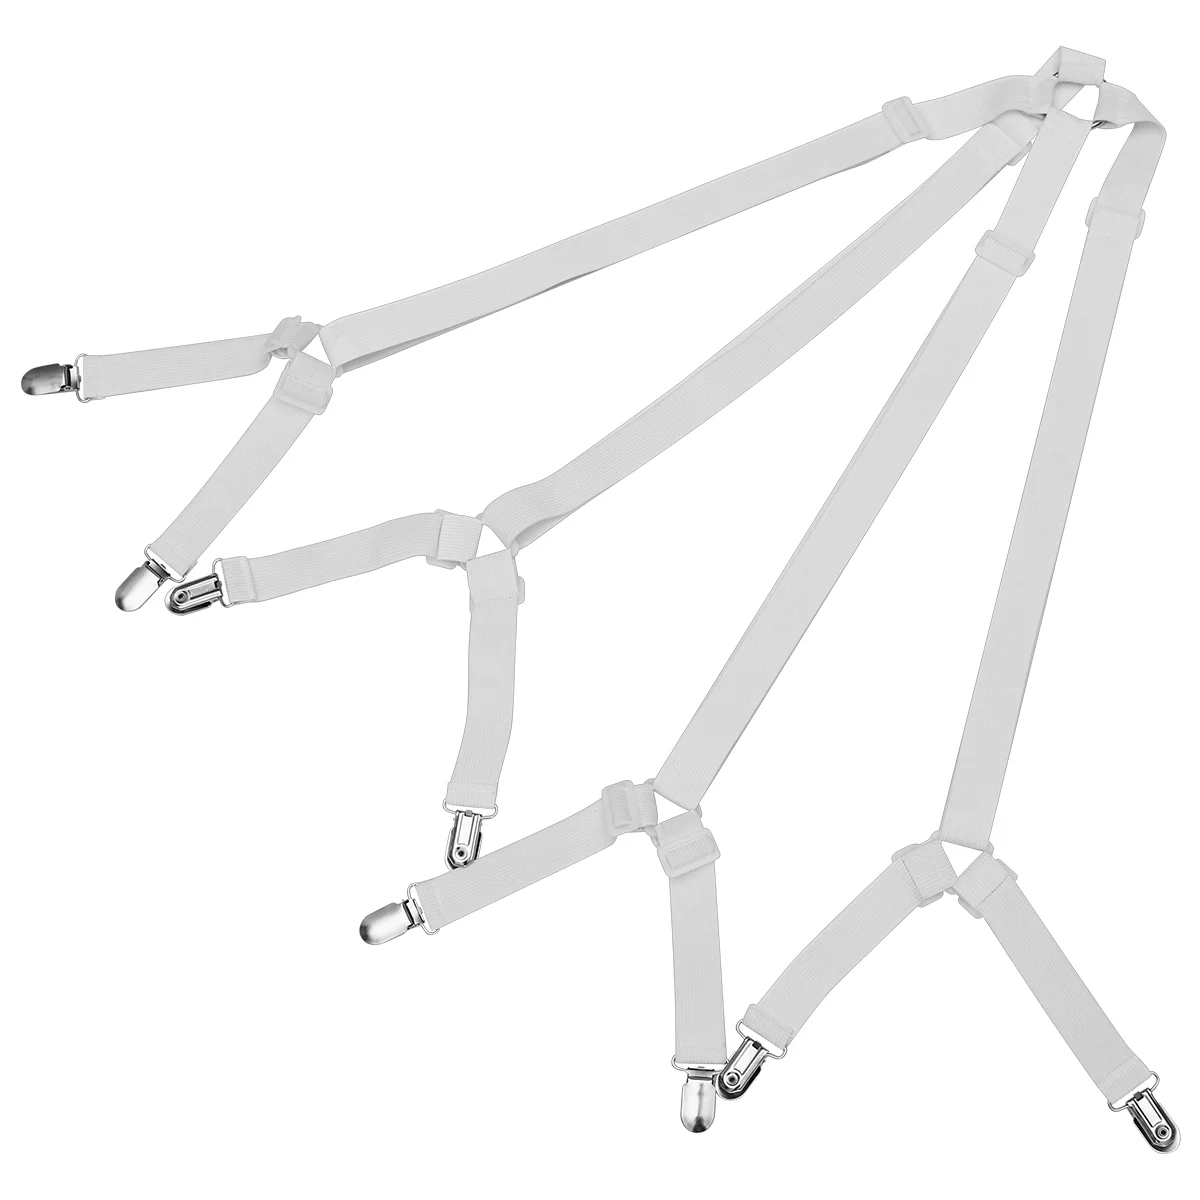 

WINOMO Sheet Bed Suspenders Adjustable Crisscross Fitted Sheet Band Straps Grippers Mattress Pad Duvet Cover Bed Sheet Corner